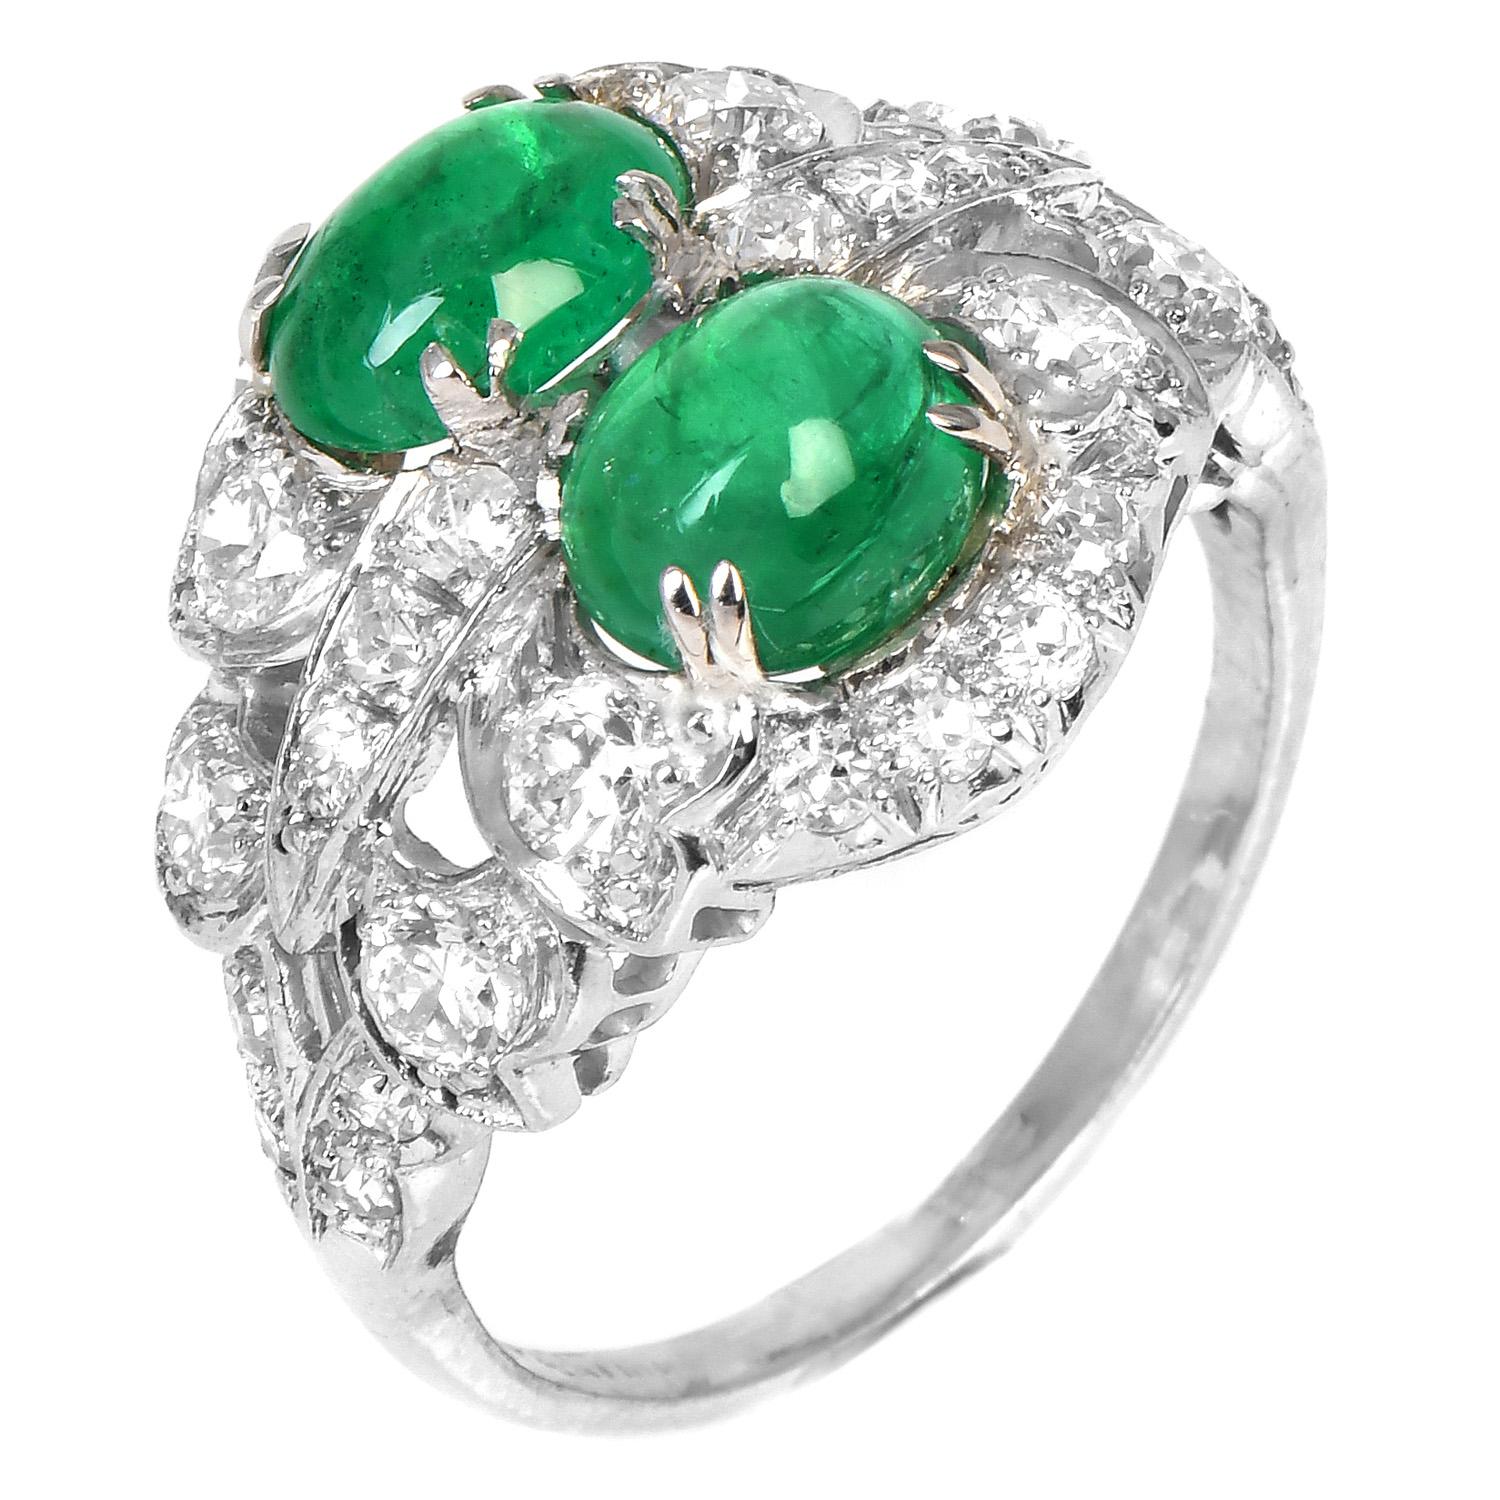 This one-of-a-kind Double emerald, floral-inspired art dego ring, is the perfect compliment for your emerald jewelry collection.

With gorgeous old cut hight quality diamonds, adorning the luxurious platinum crafted piece.

It is centered with (2)